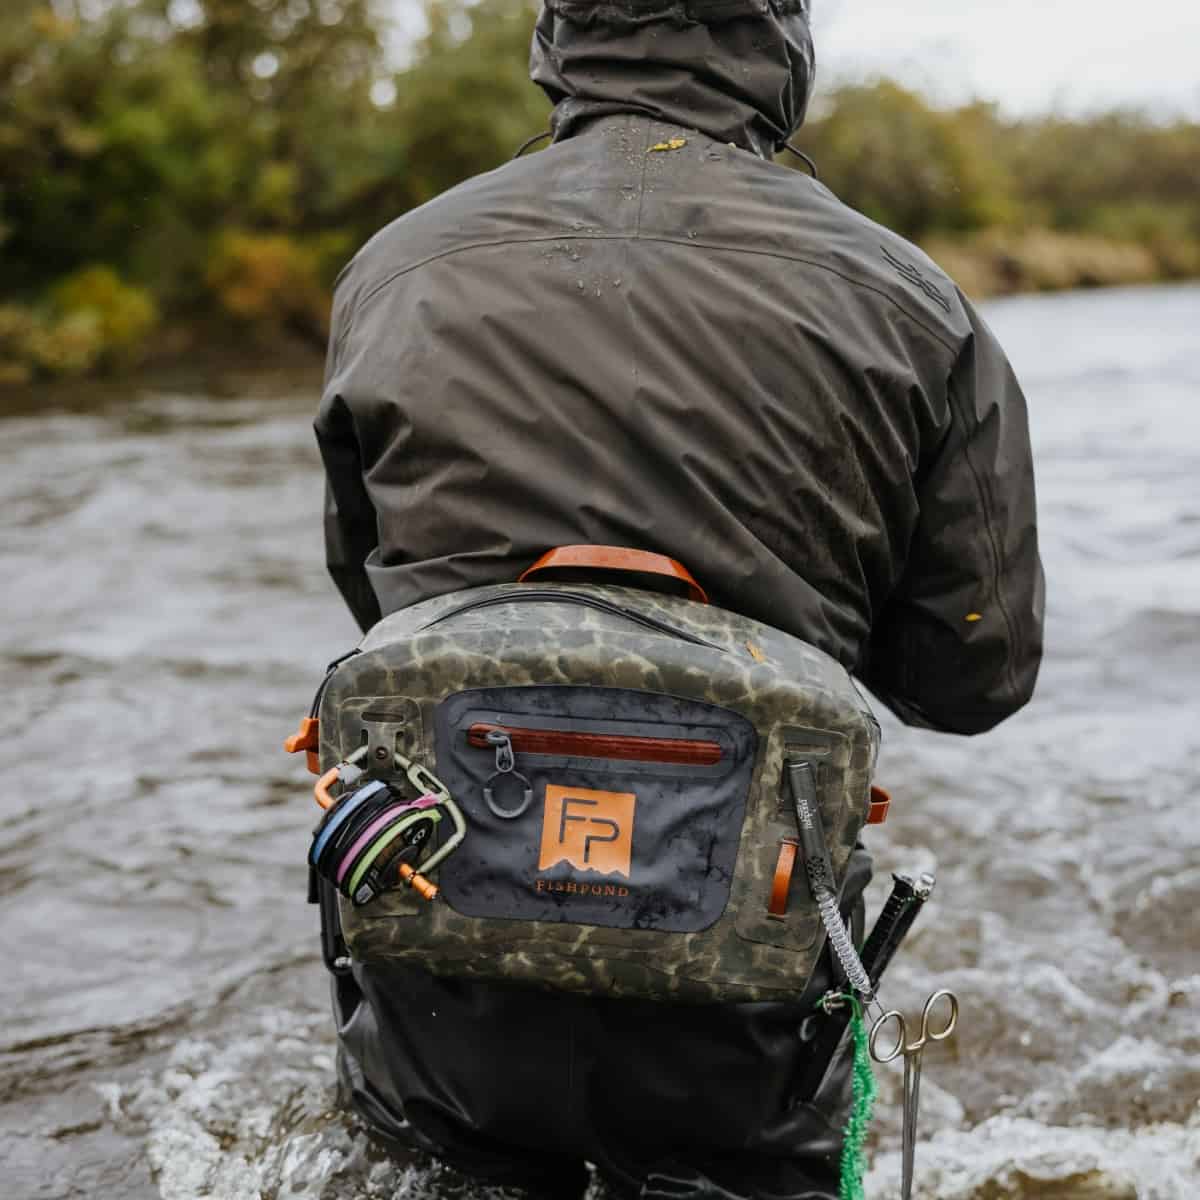 Fishpond Thunderhead Submersible Sling Pack Review